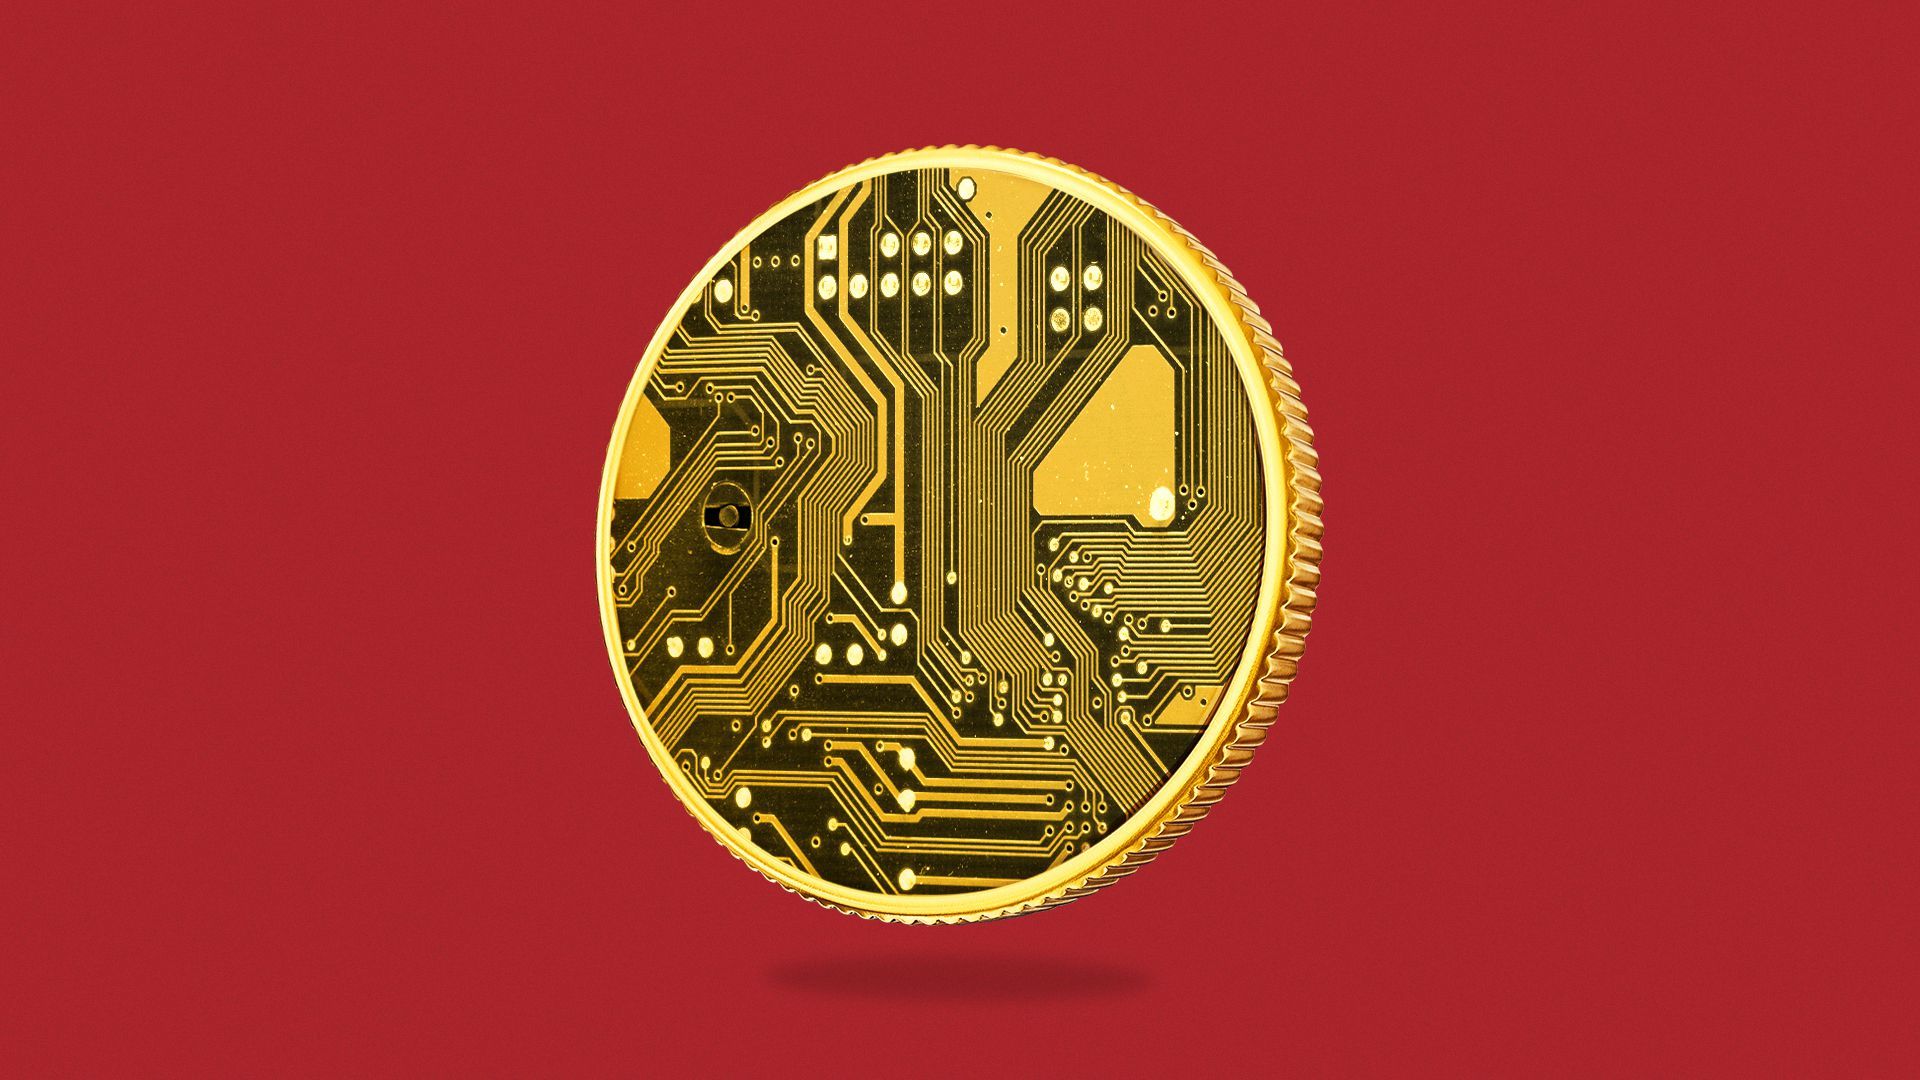 Illustration of a coin with circuitry pattern on its face.